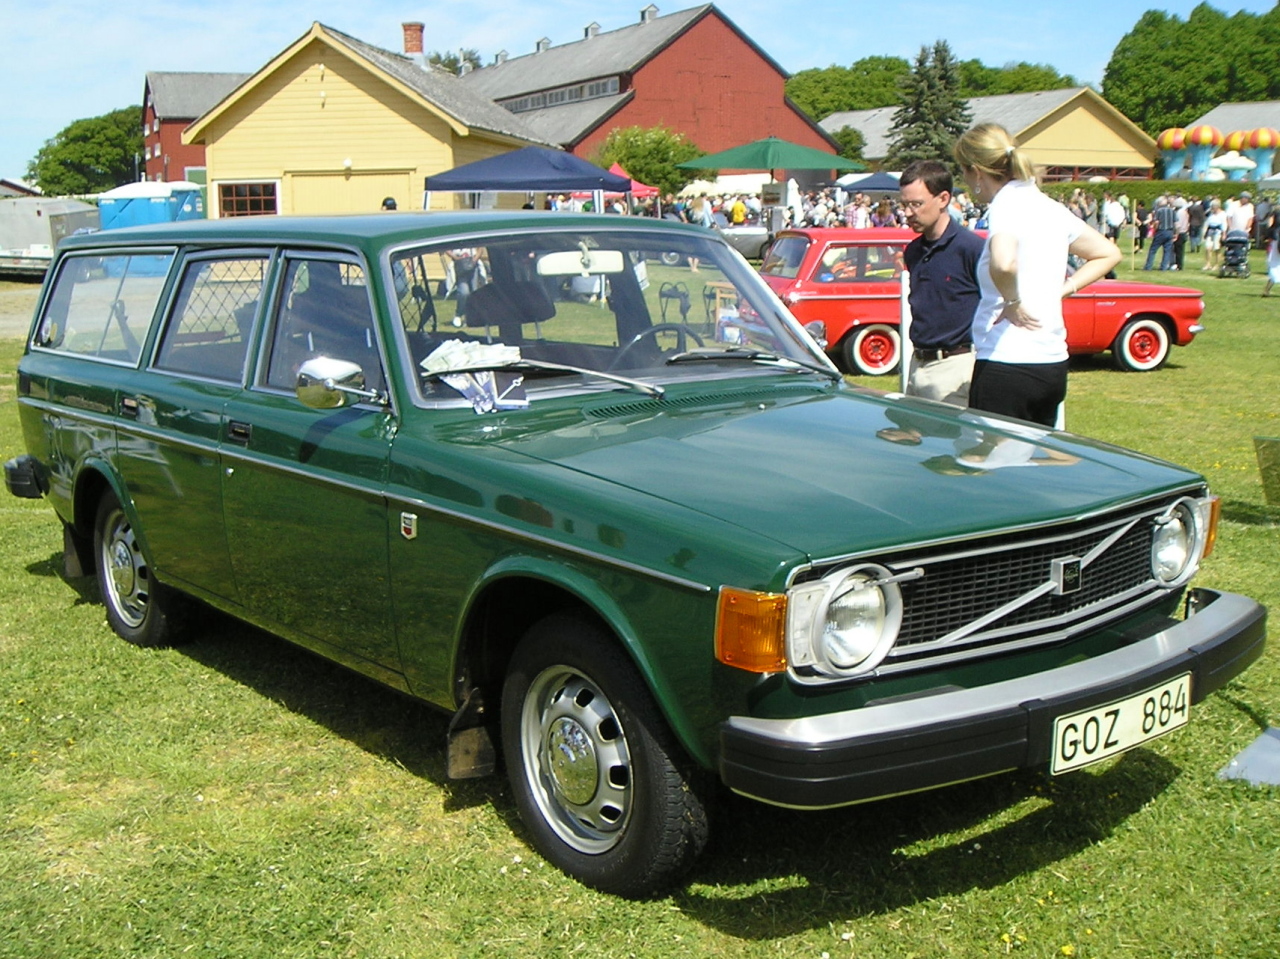 On this page we present you the most successful photo gallery of Volvo 145GL